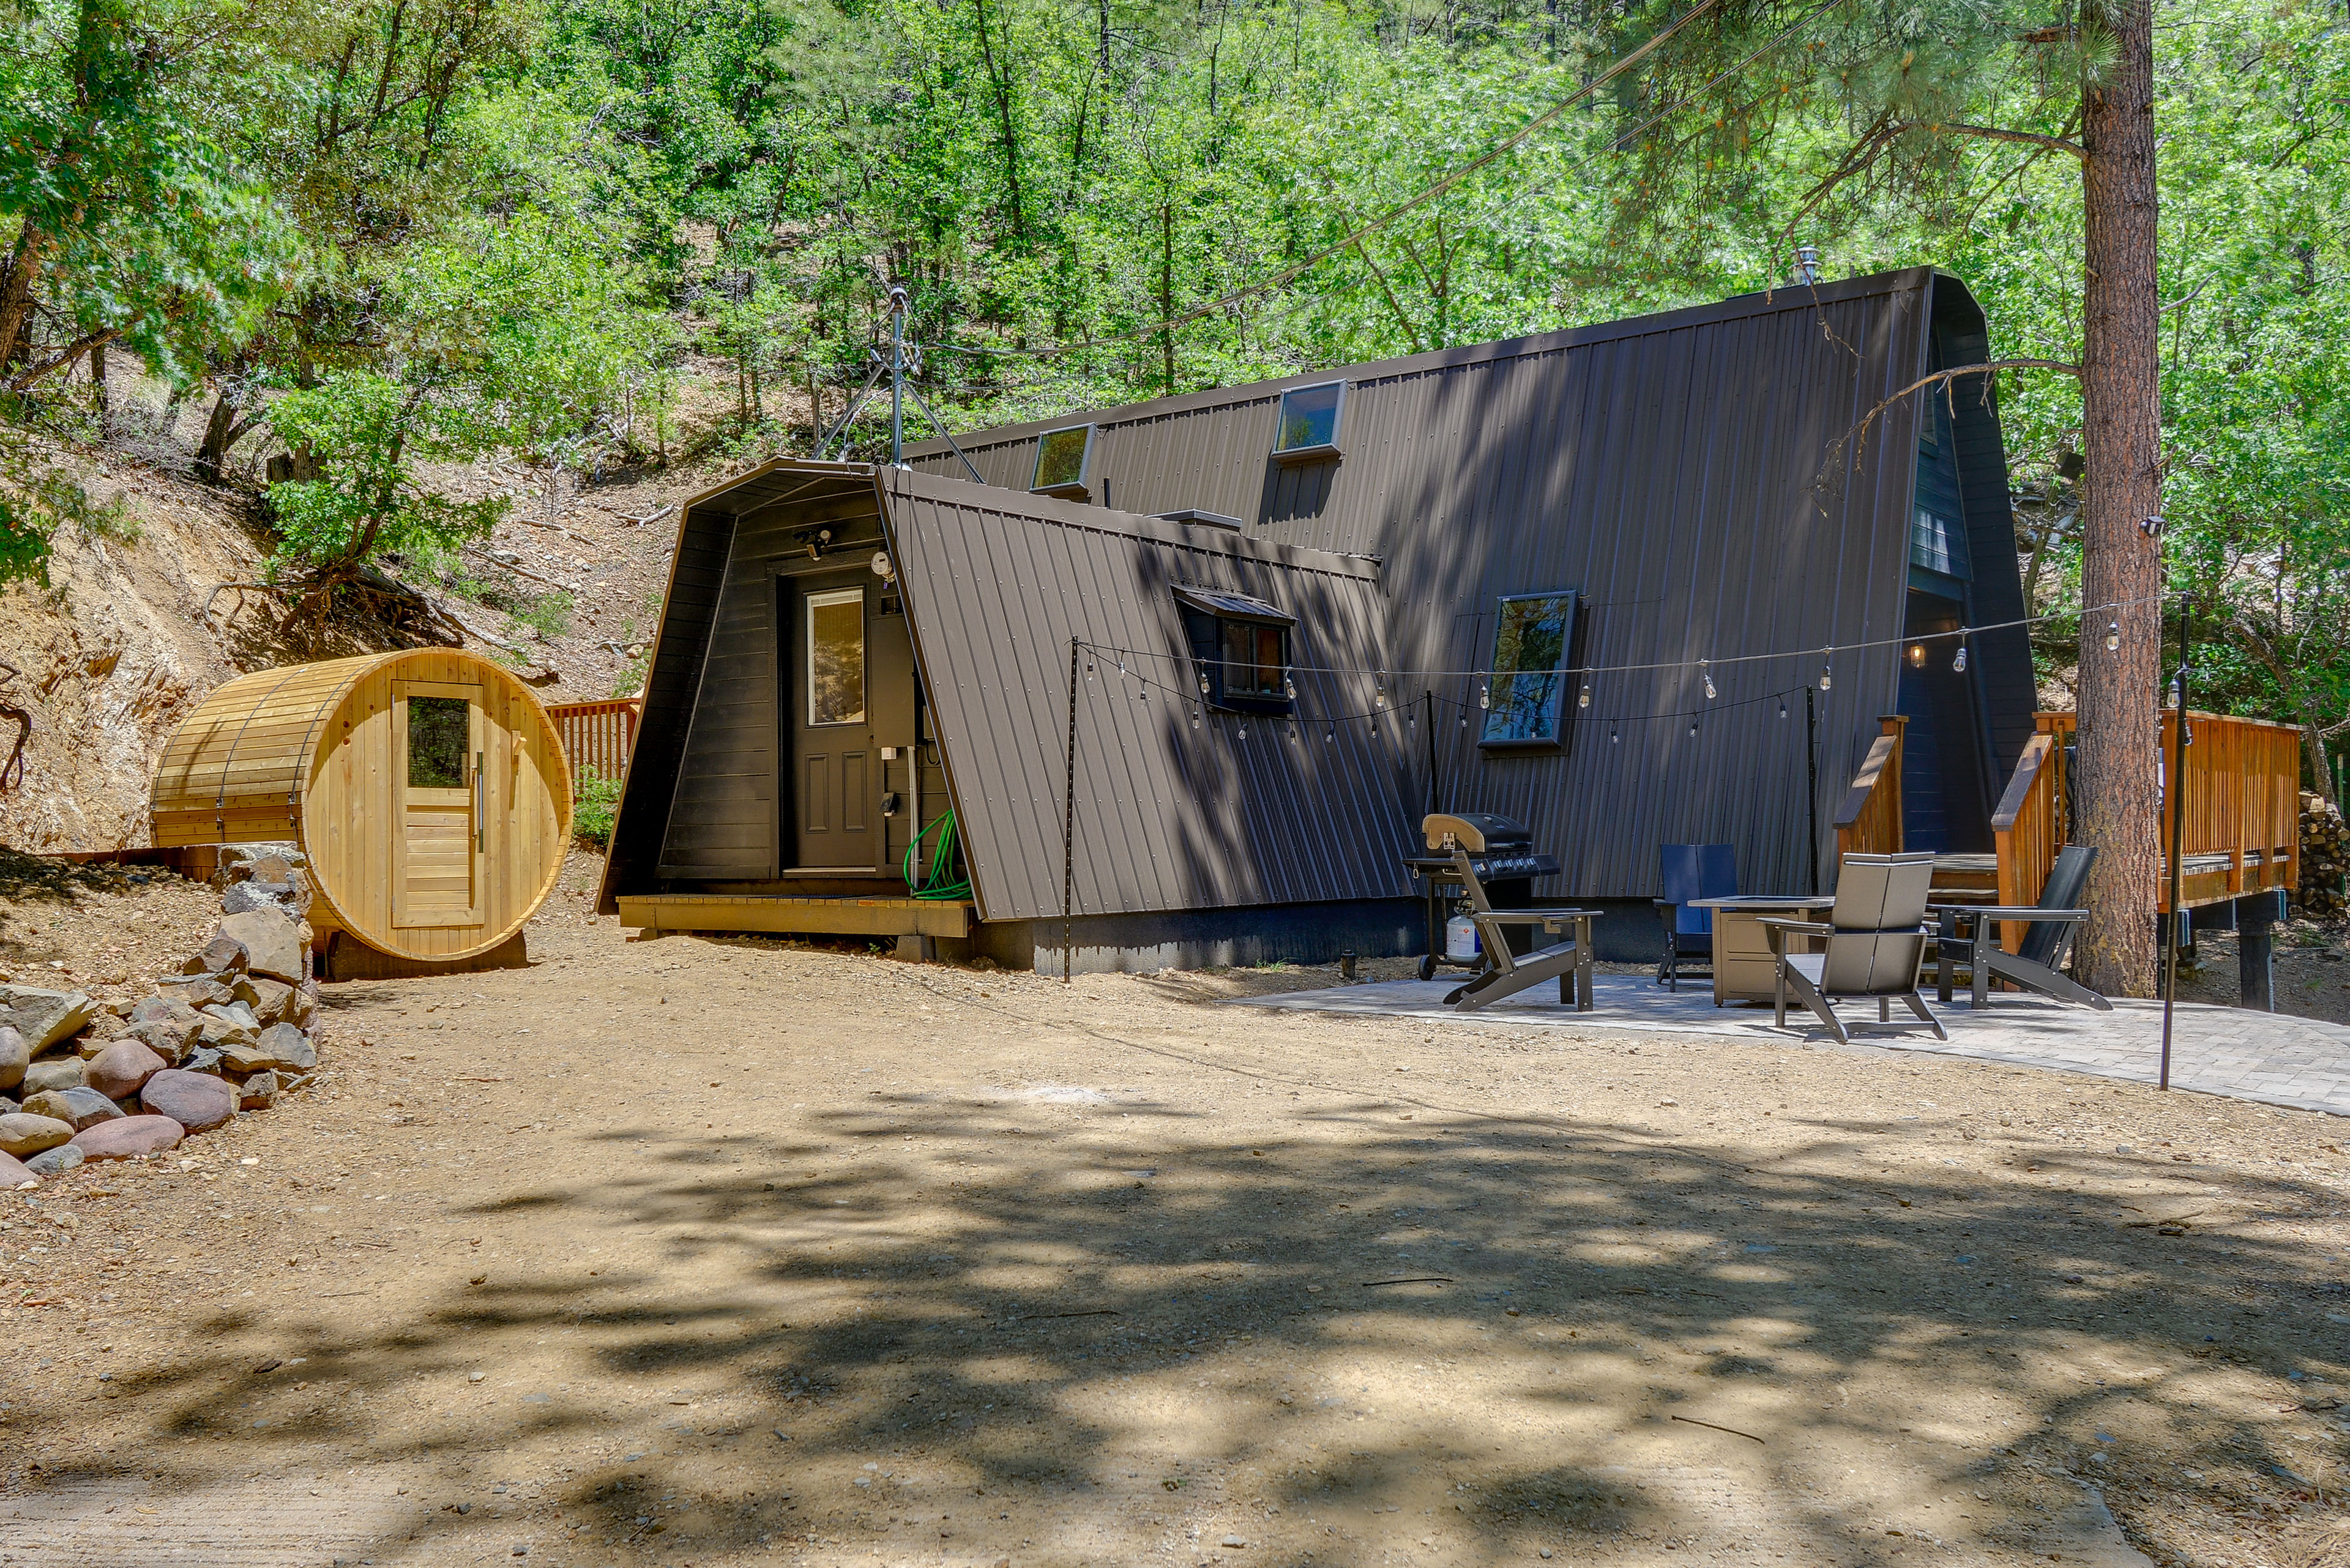 'The Hygge Hideaway' Cabin Near National Forest